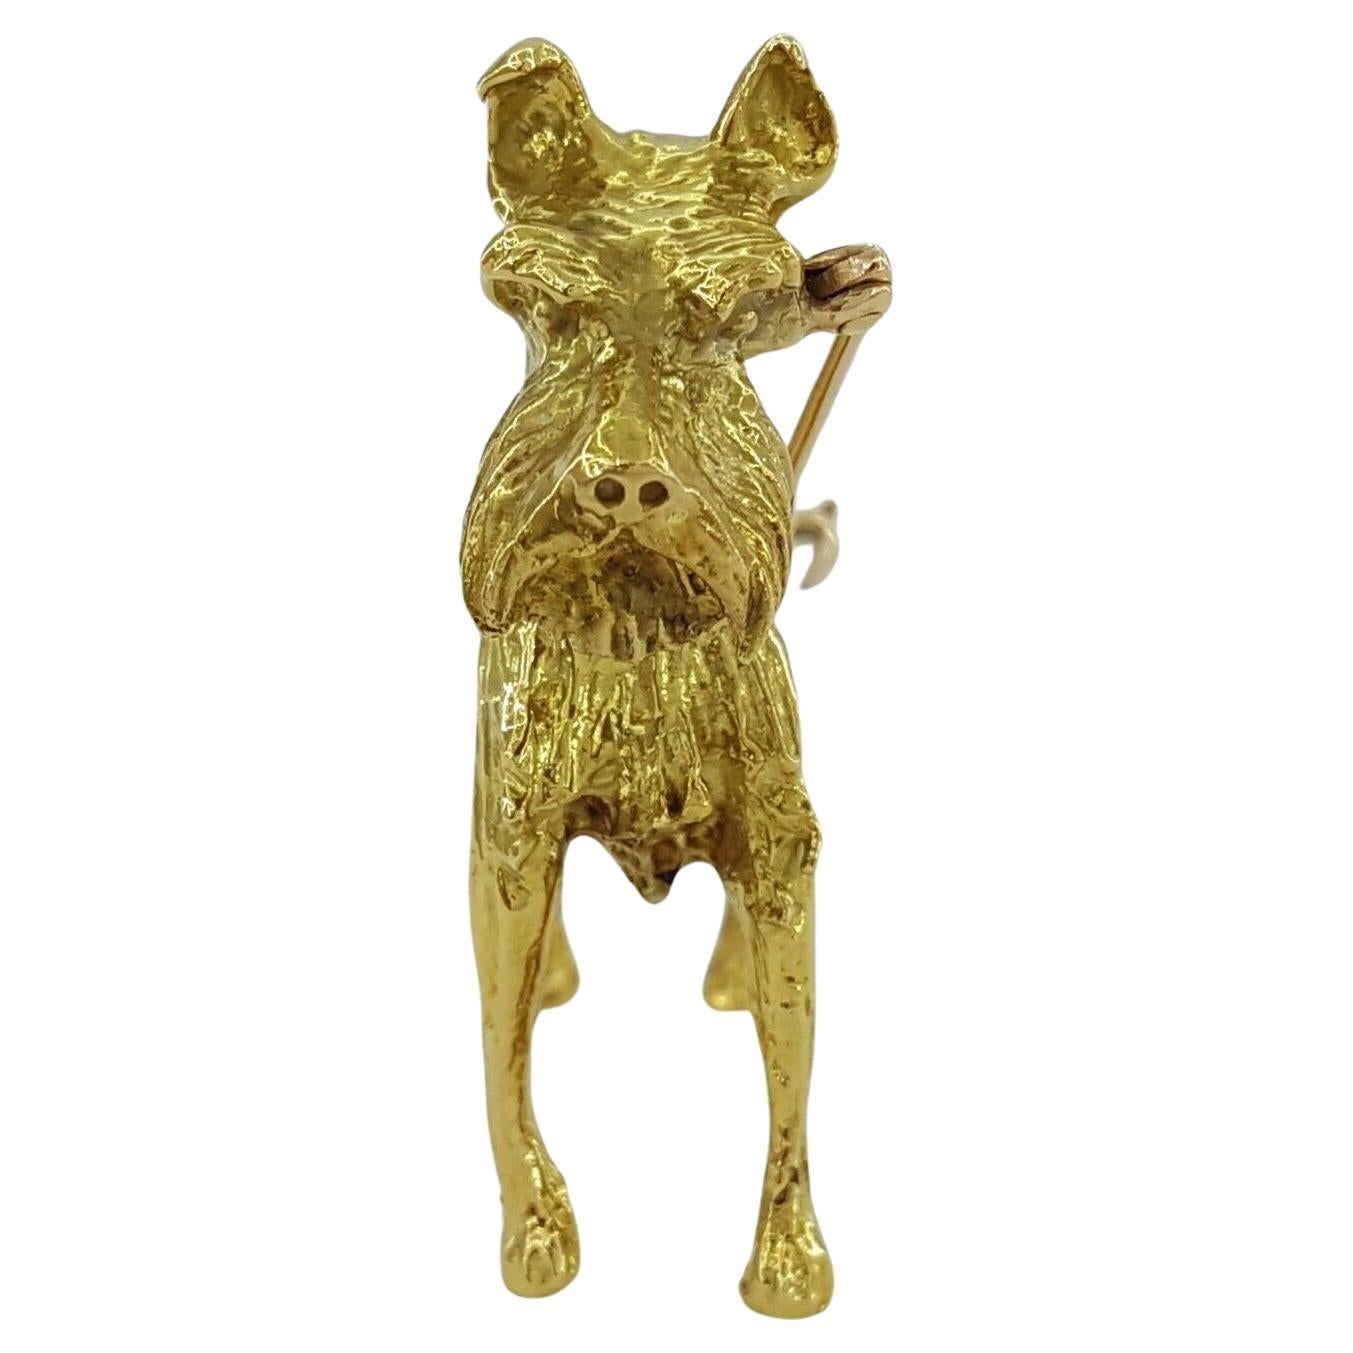 Vintage Tiffany & Co. 18K Yellow Gold Terrier Dog Brooch / Pin.



The brooch weighs 28.8 grams, 47mm(1.85